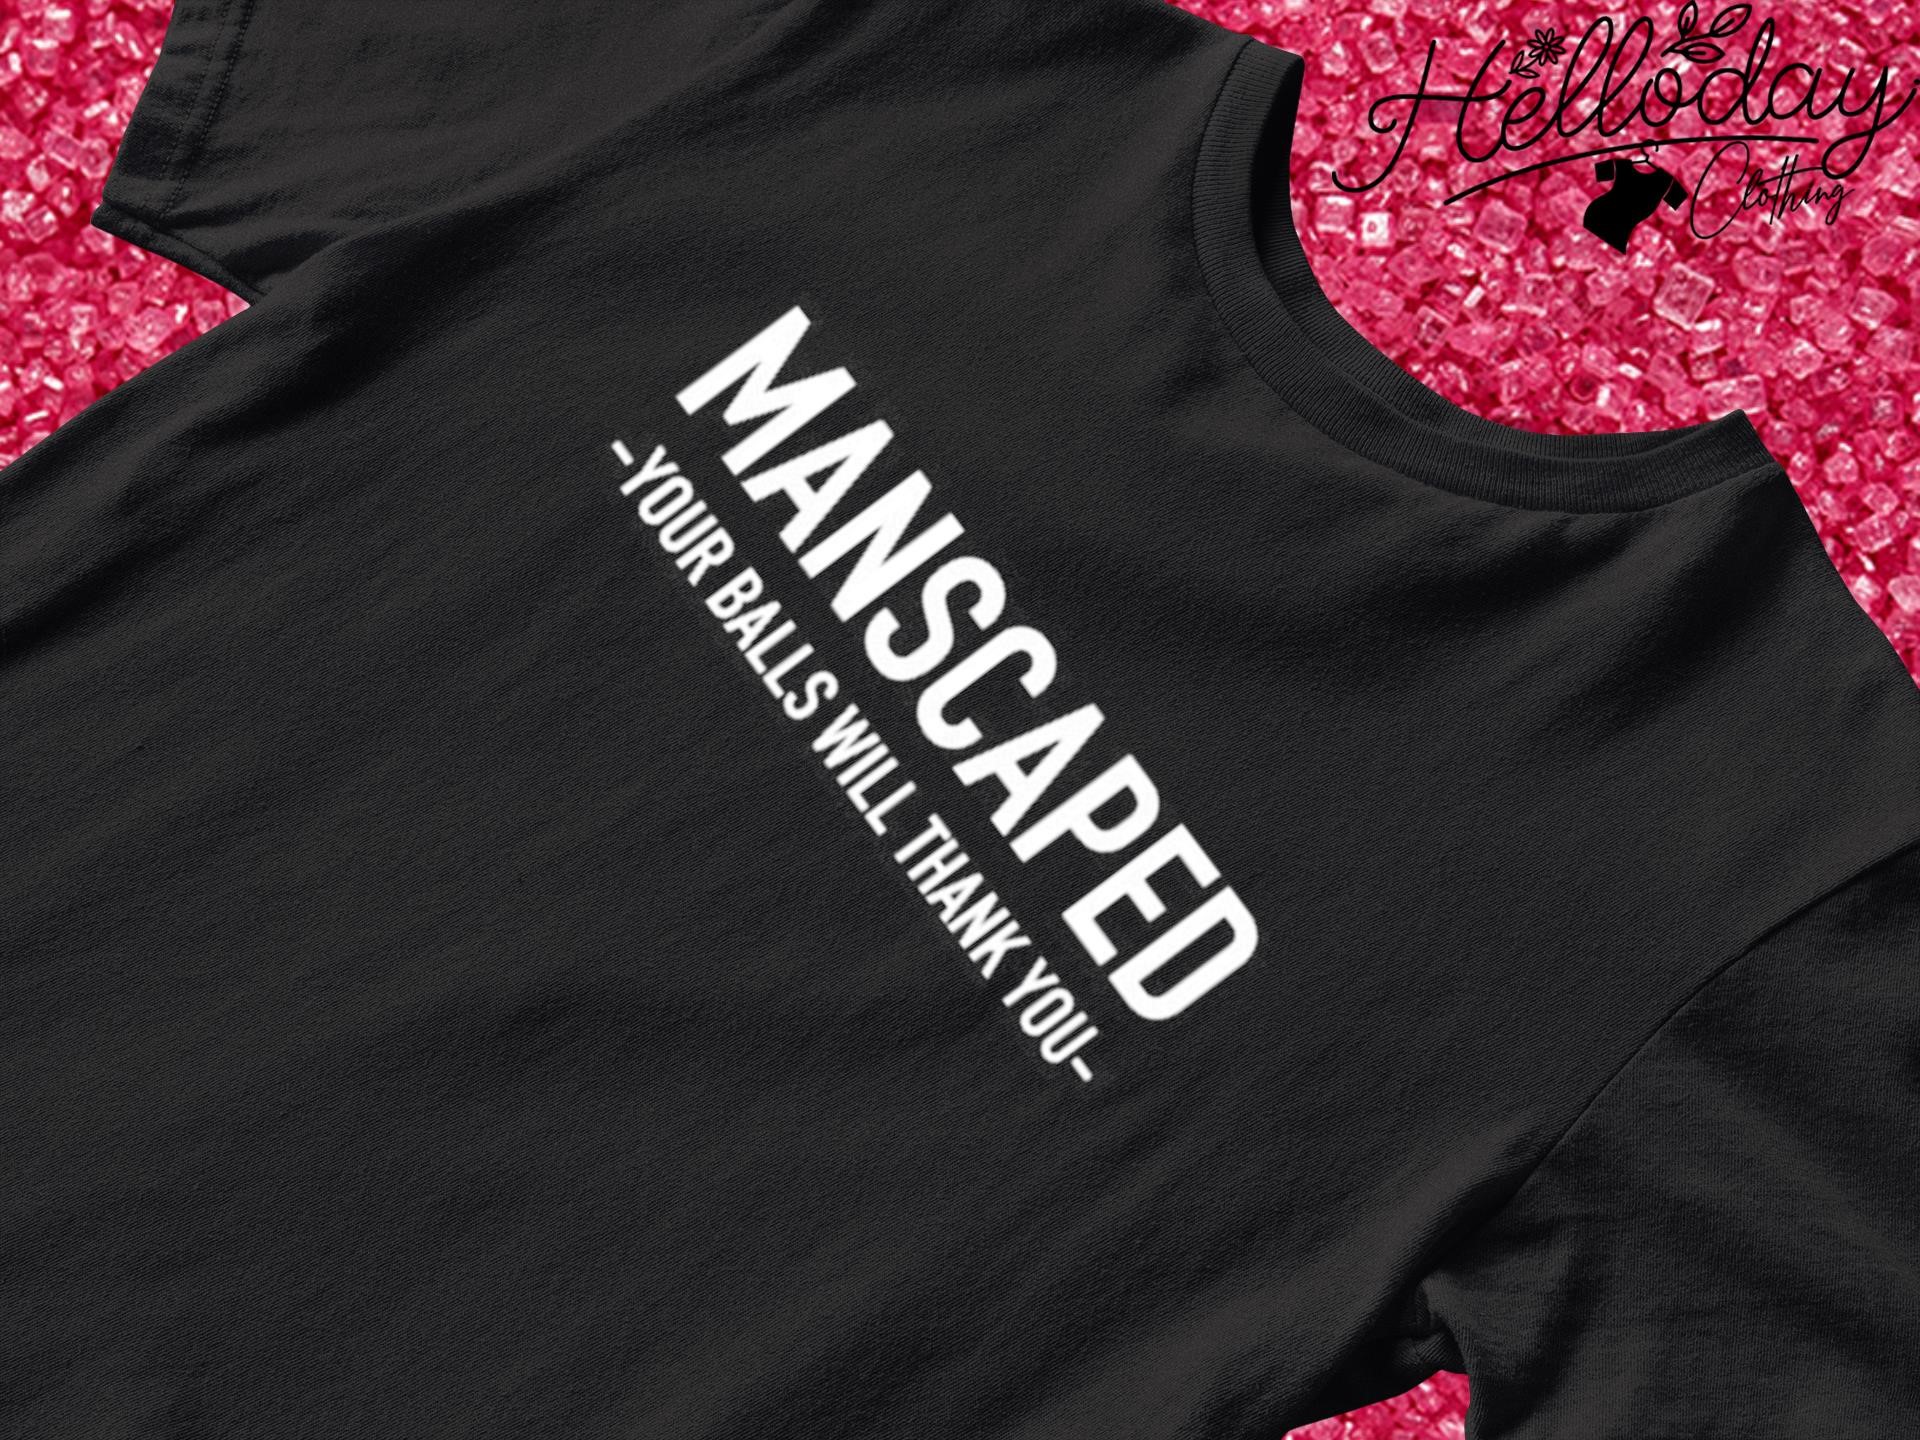 Manscaped your balls will thank you shirt